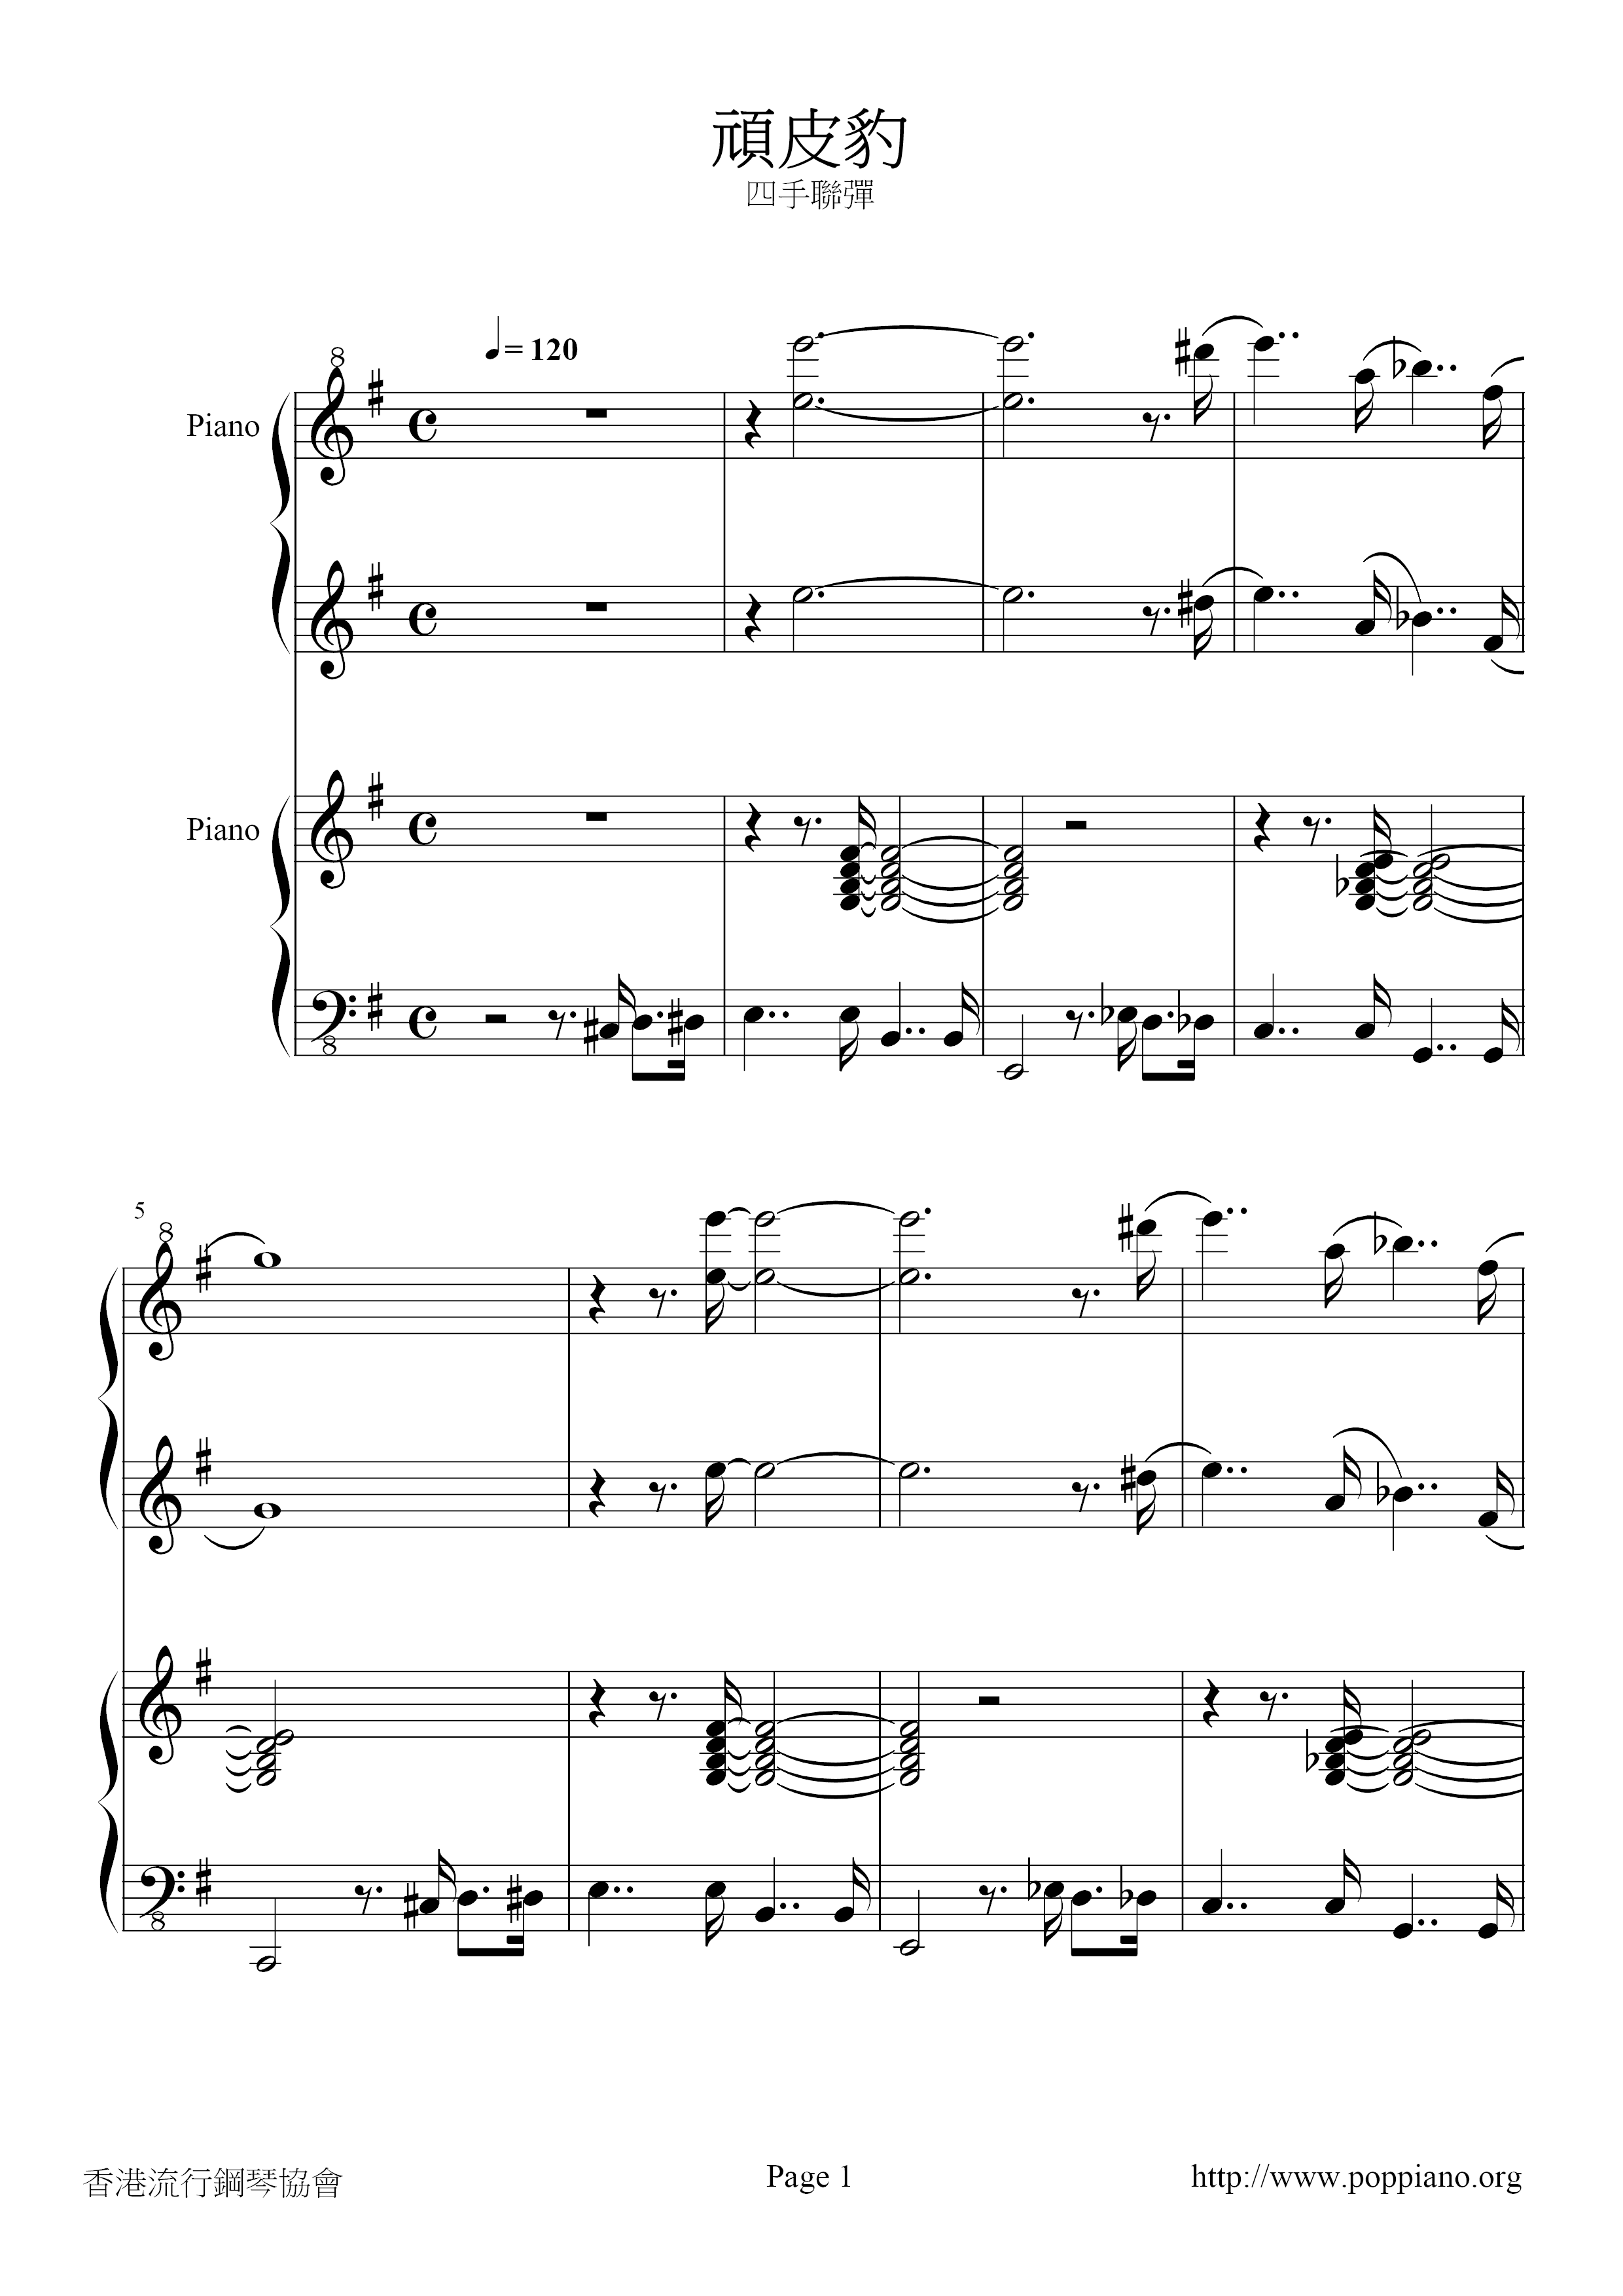 The Pink Panther Theme Score